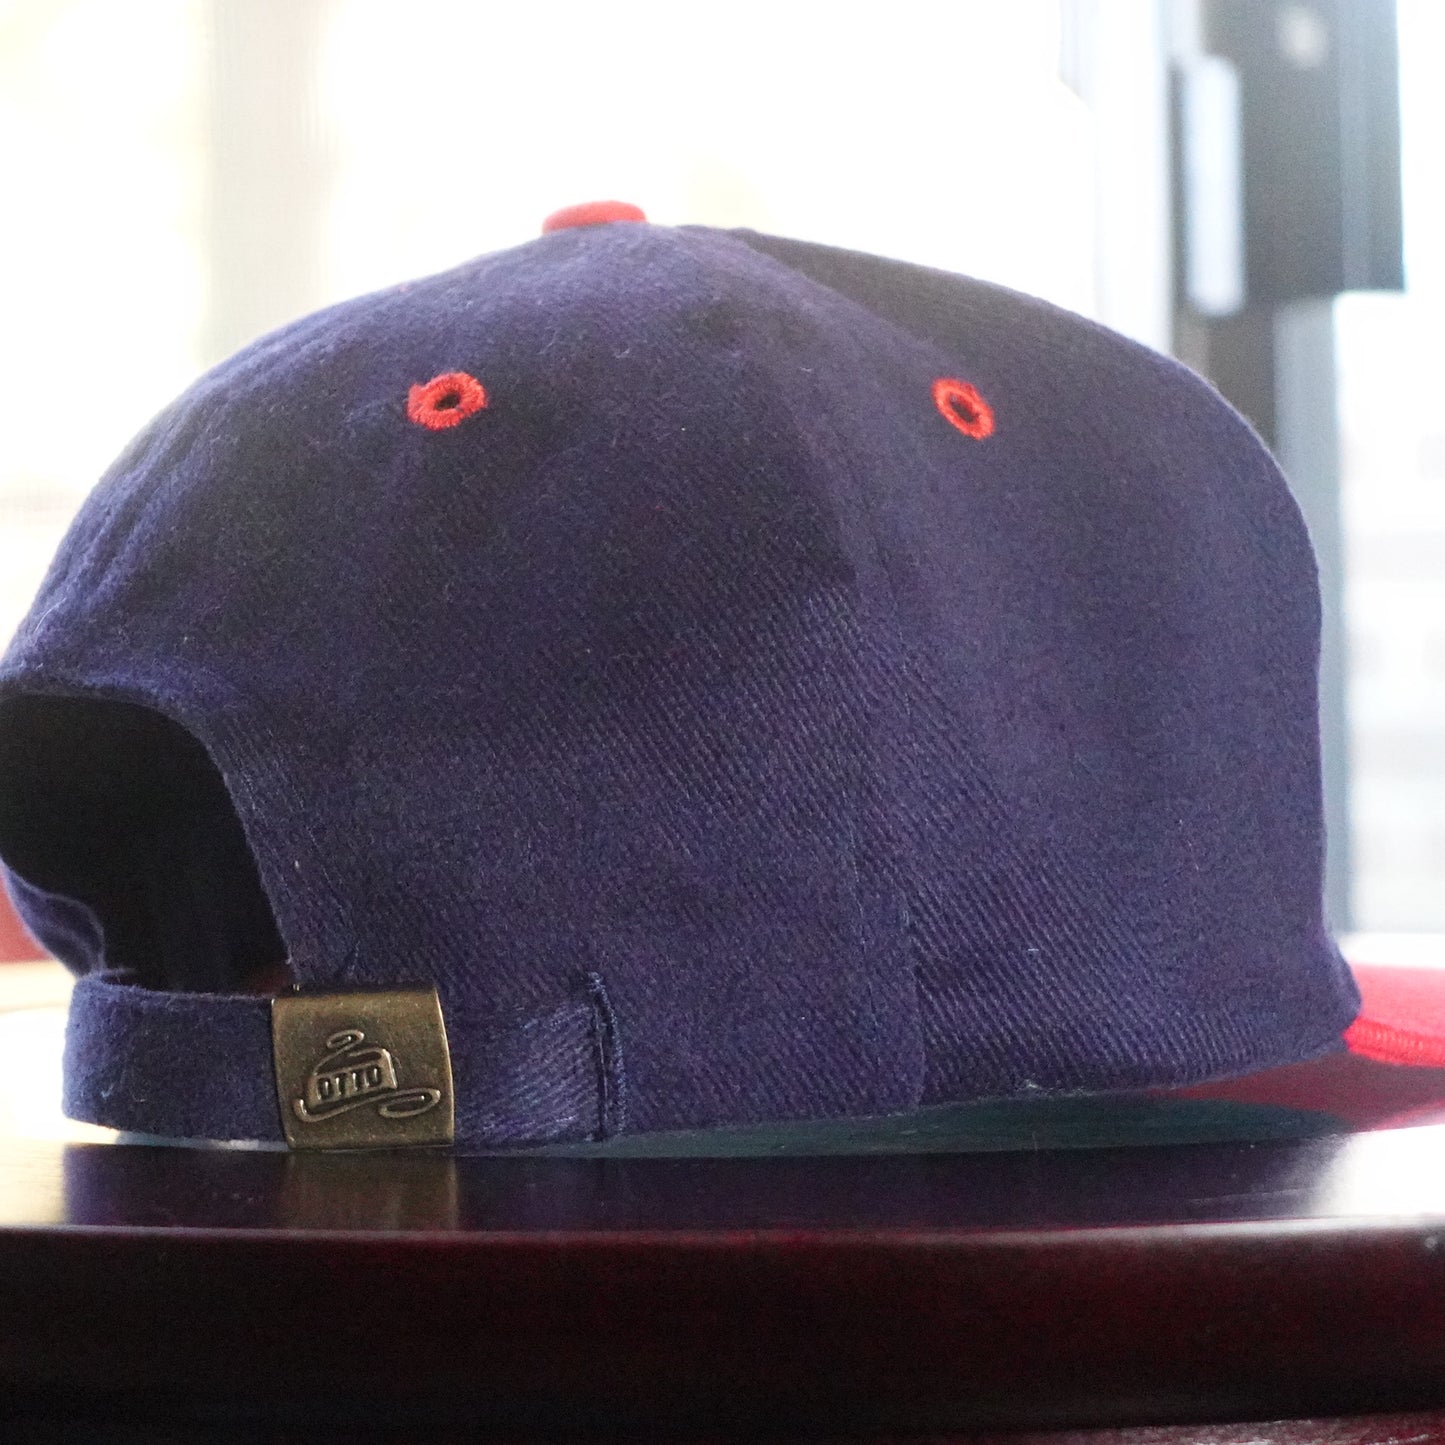 BB Couture Signature Cap with Exclusive double B chain stitching